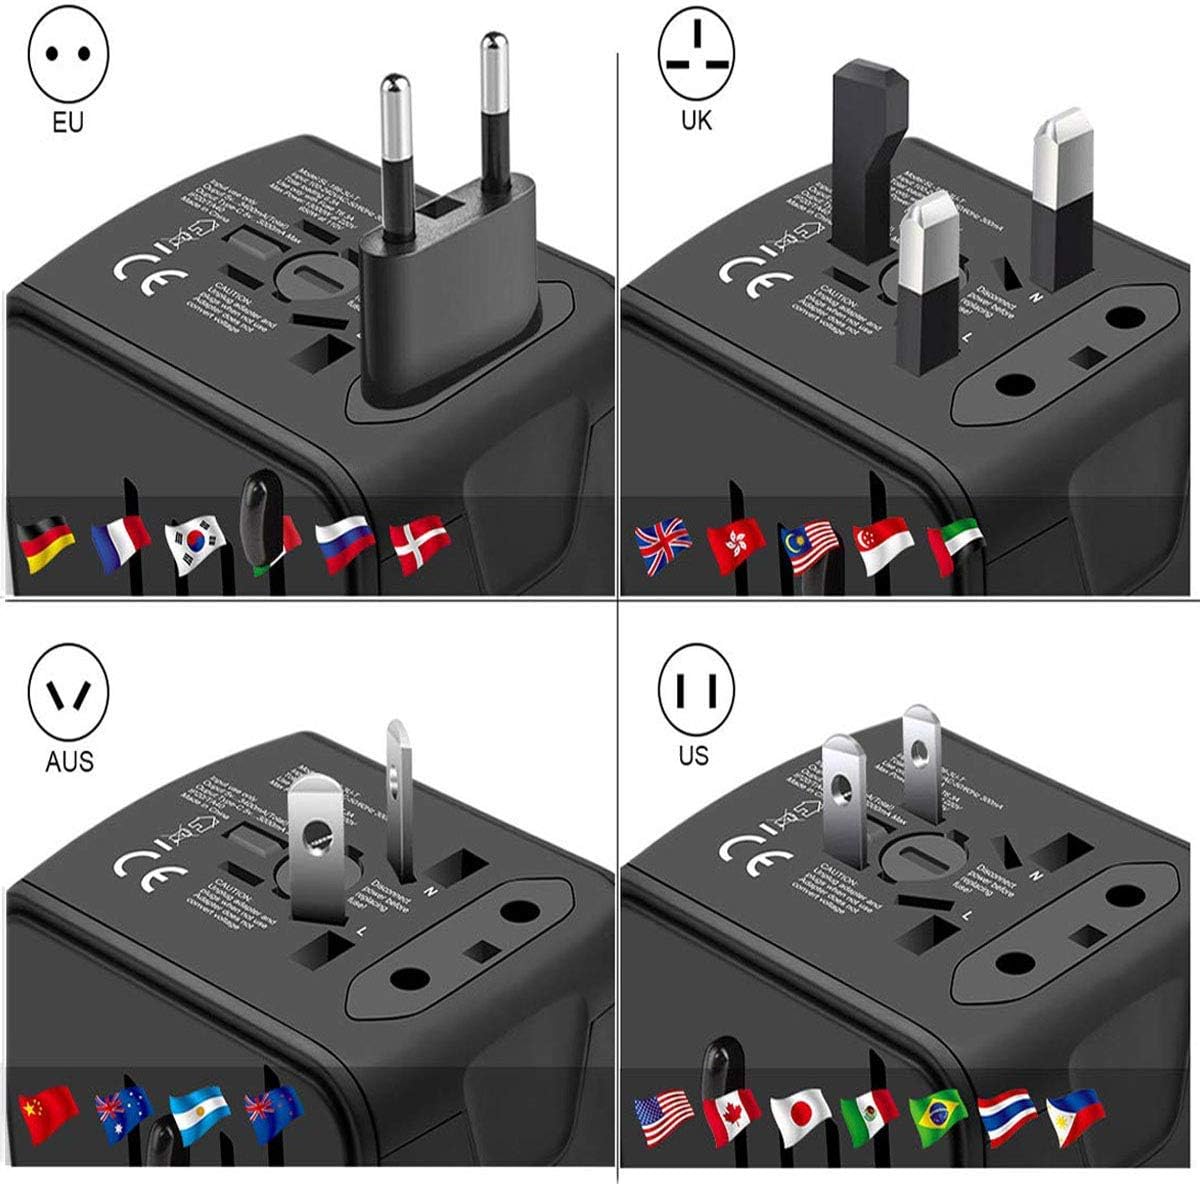 Universal Travel Adapter, International Power Adapter with 3 USB and 1Type C for USA,UK,EU Covers 150+Countries